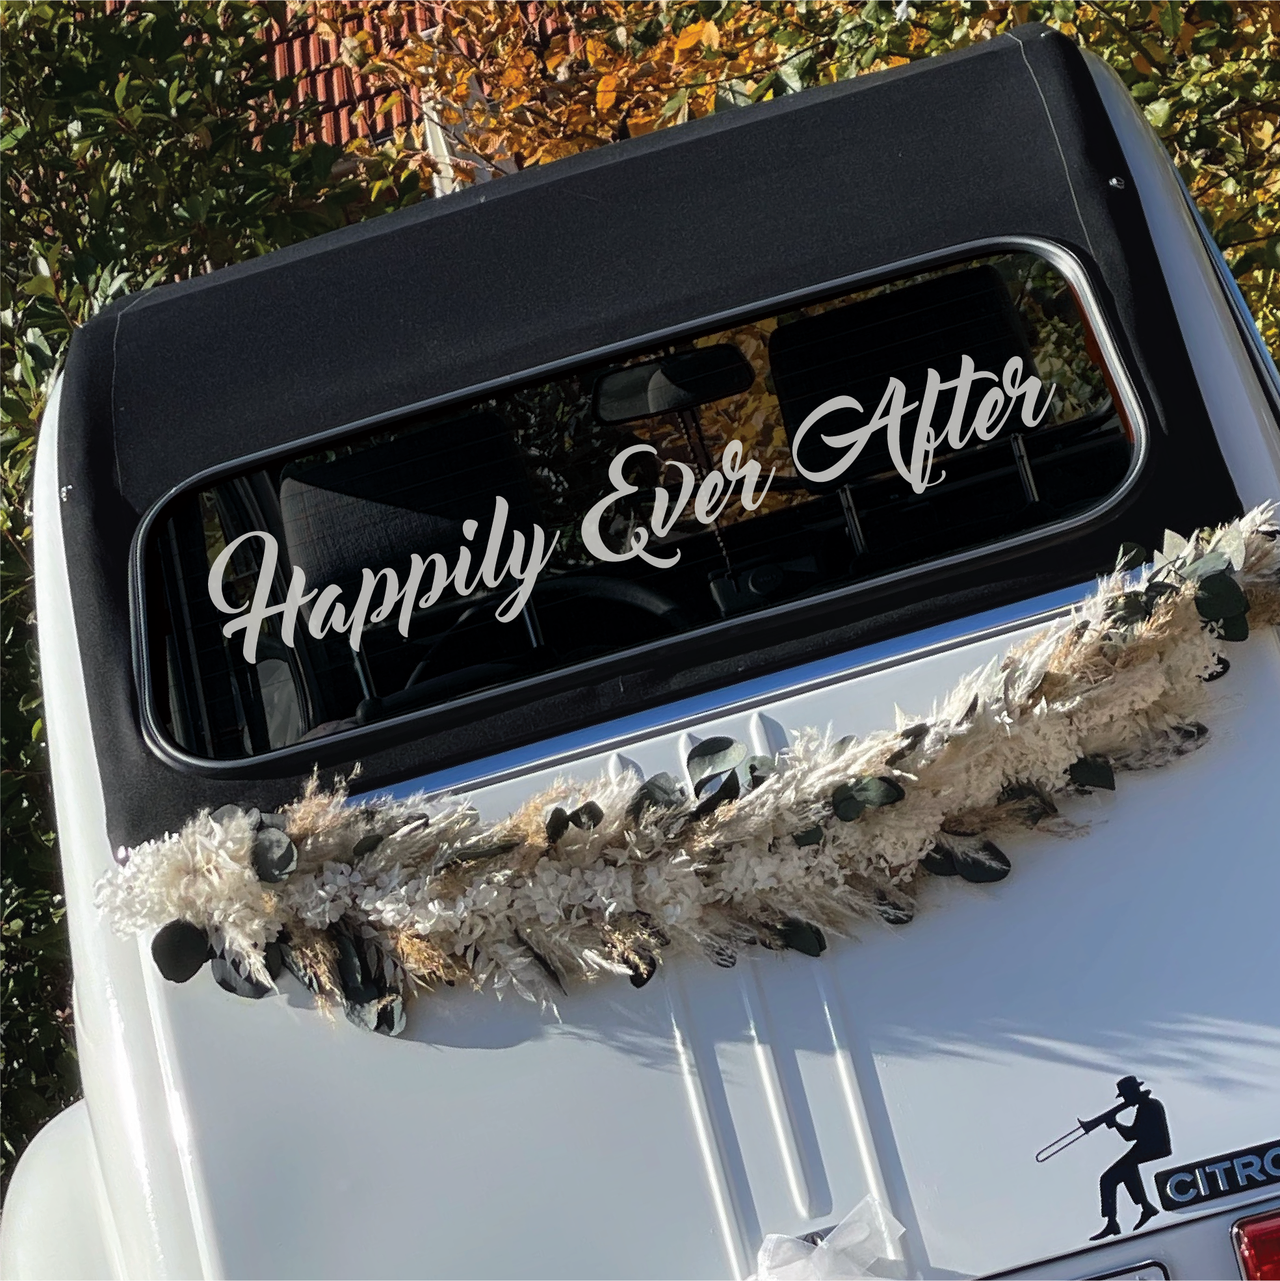 Happily Ever After Wedding Car Decal